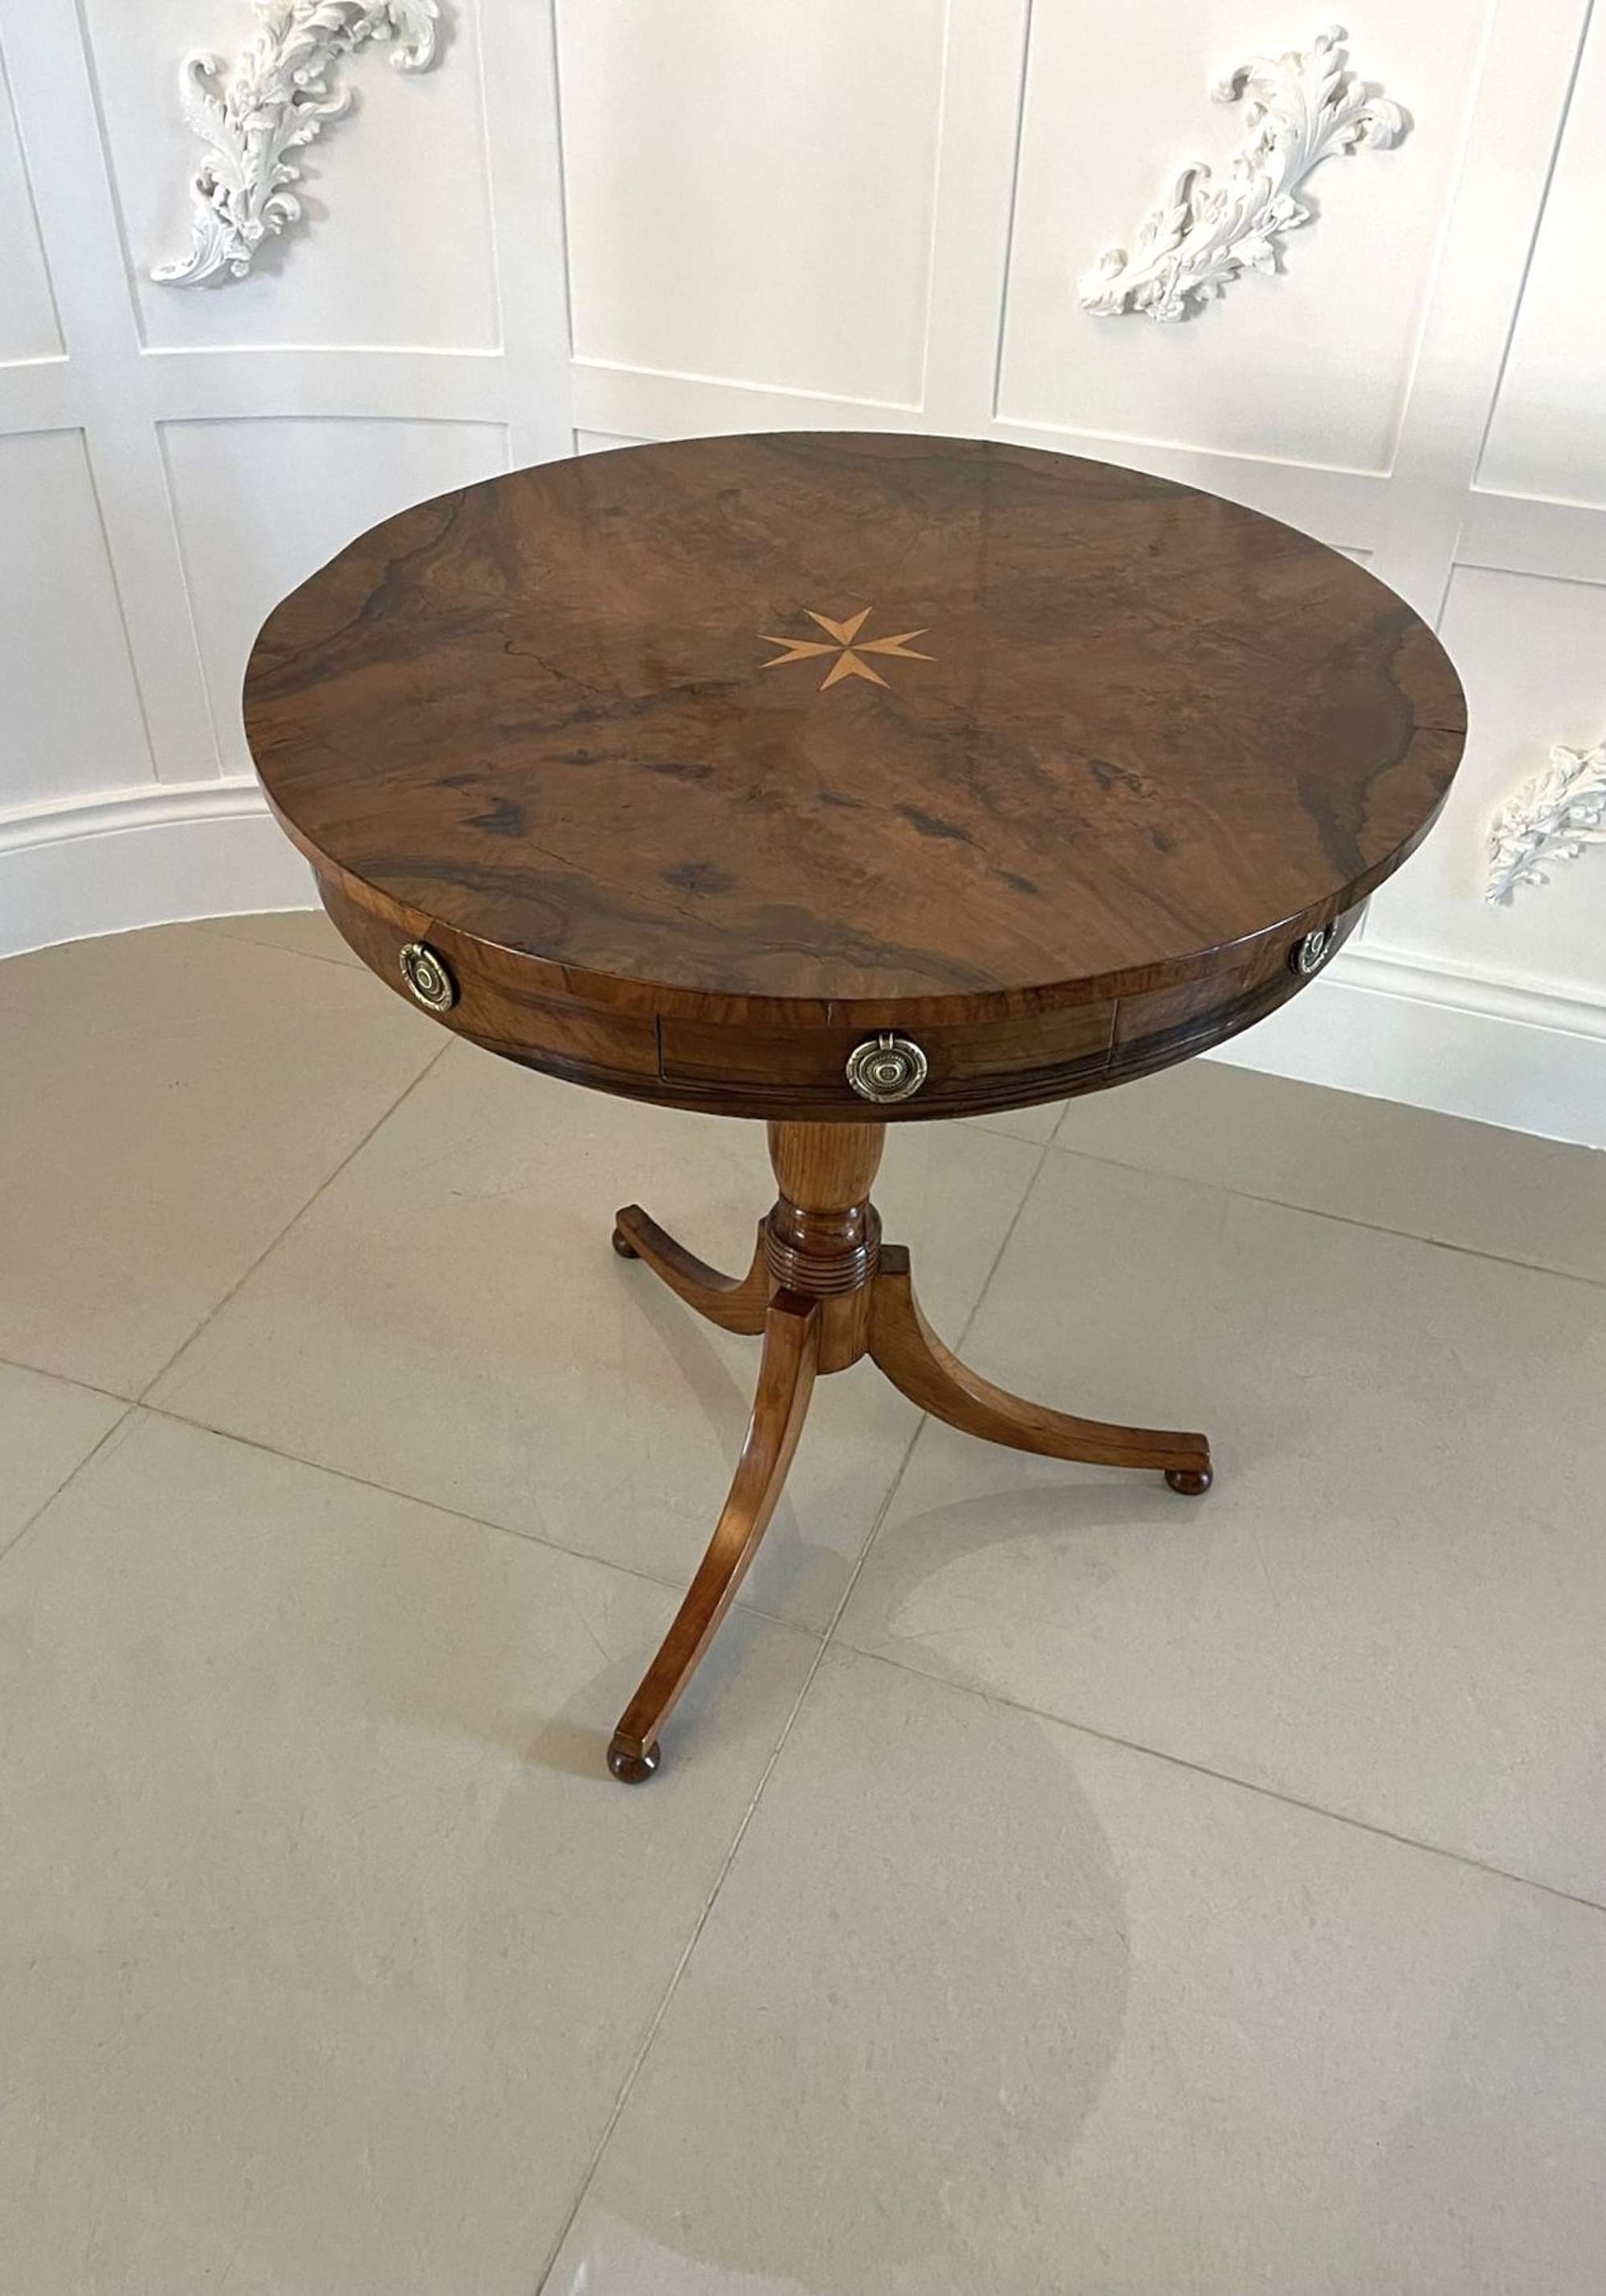 Rare Antique Victorian Quality Olive Wood Circular Drum Table